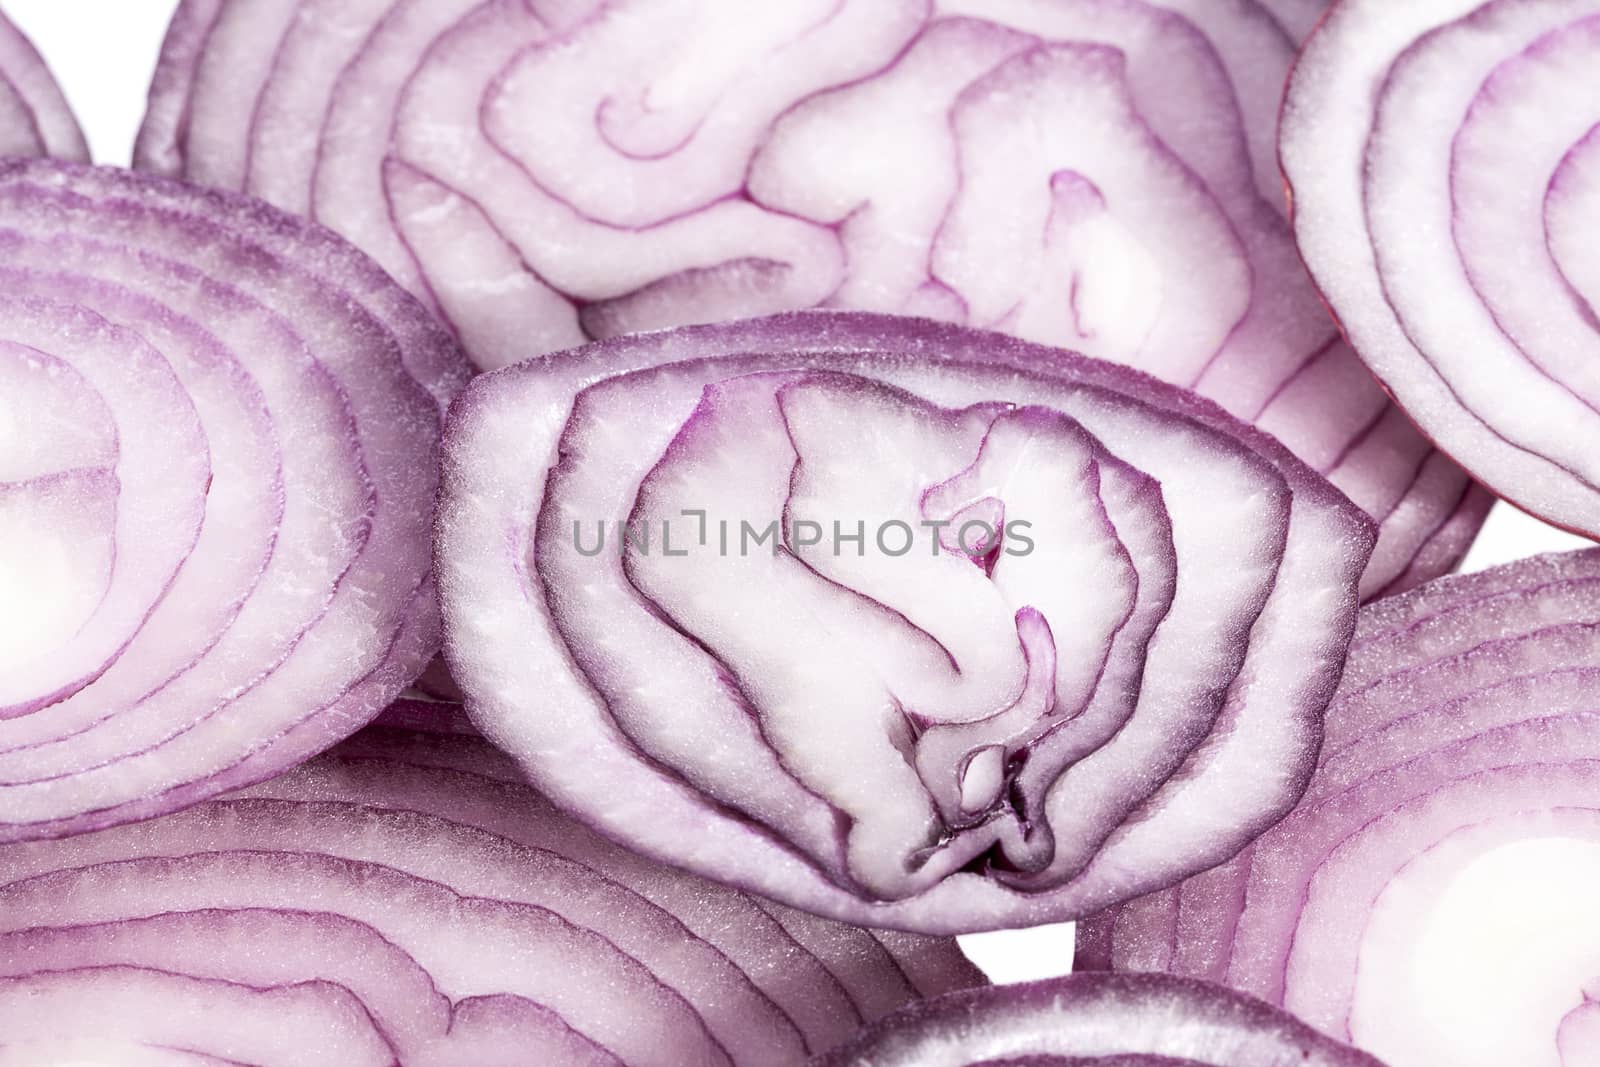 Slices of red onion on white background, close up.